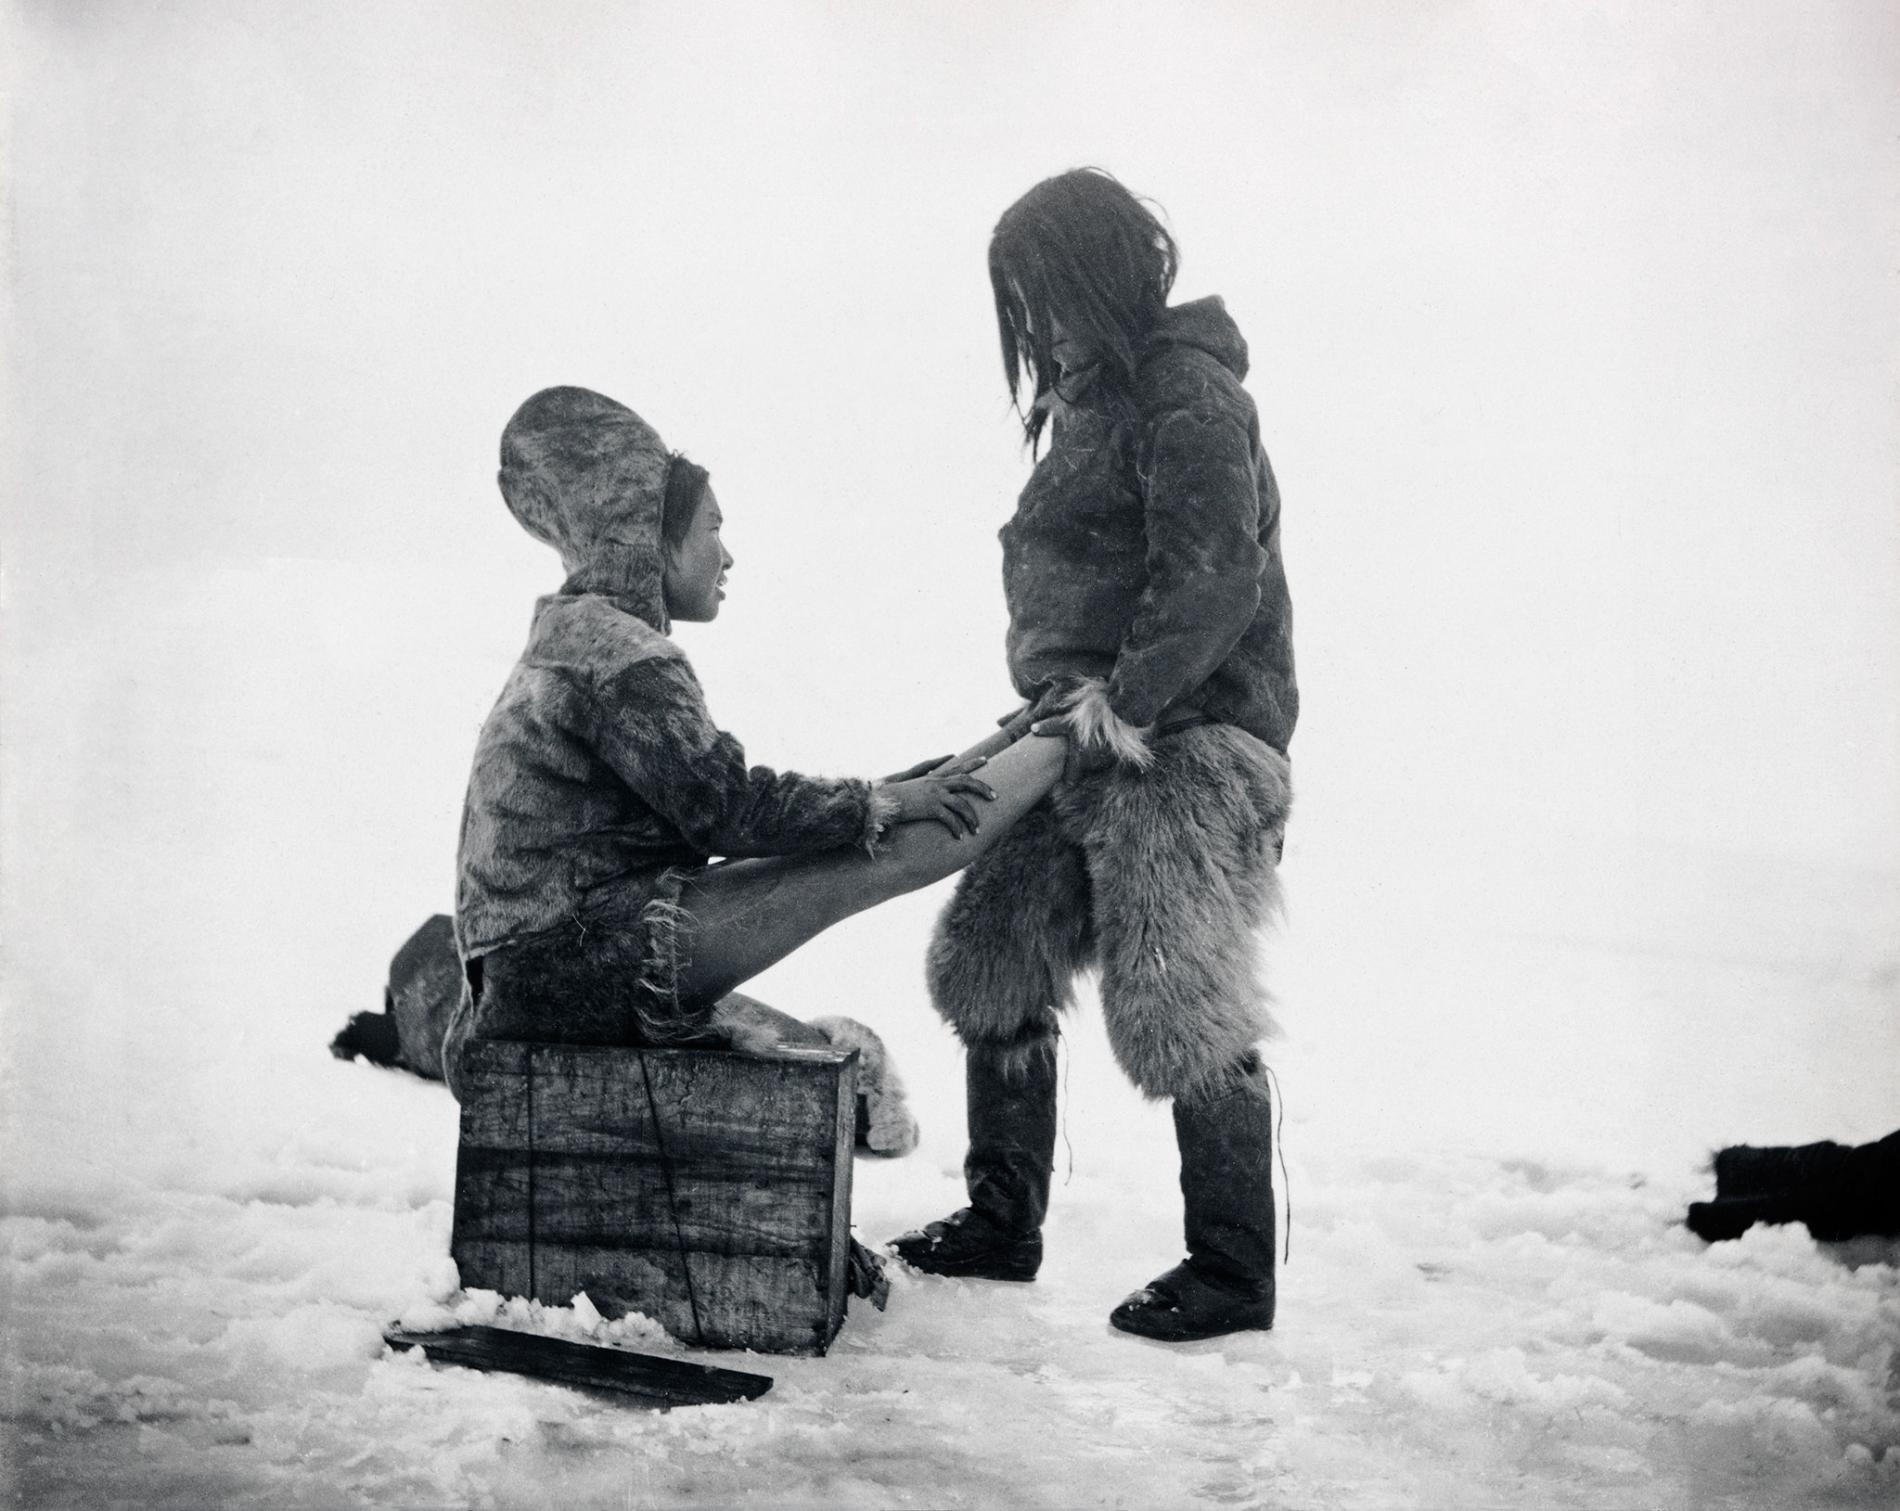 An Inuit man warms up his wife’s feet in Greenland, c. 1898-1902.jpg